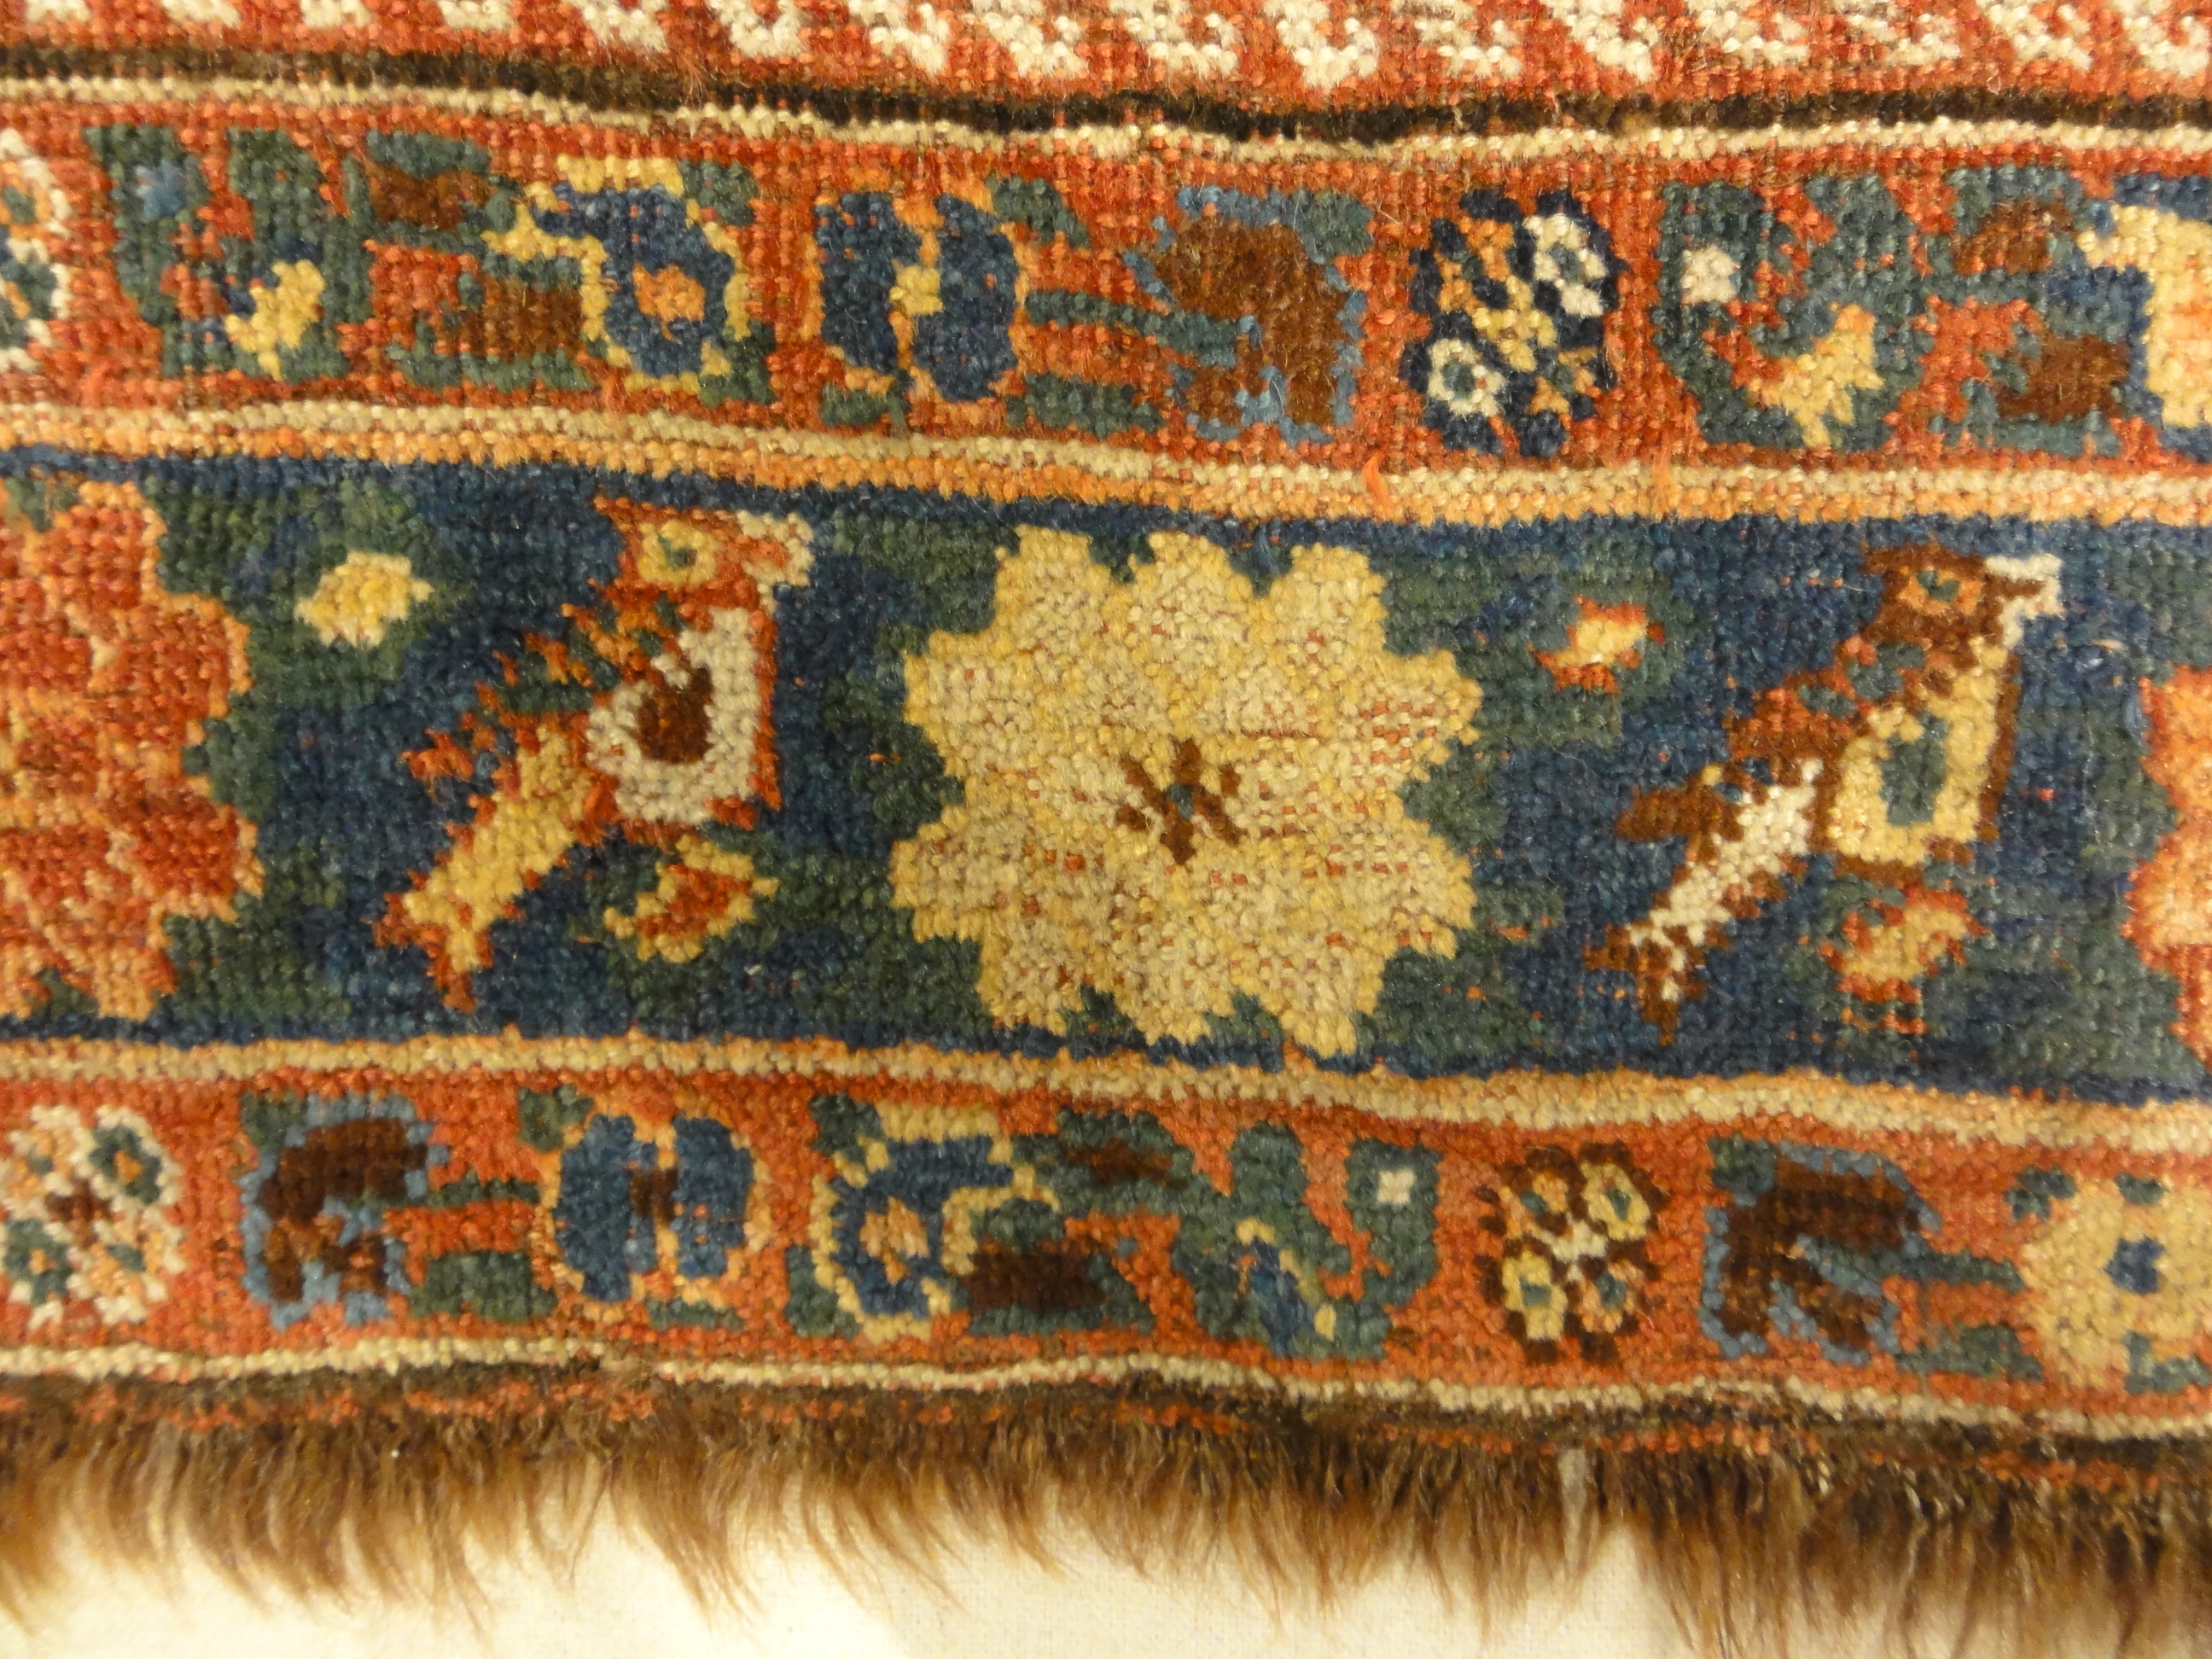 Antique Afshar Traditional Boteh Rug. A piece of genuine authentic antique woven carpet art sold by Santa Barbara Design Center, Rugs and More.